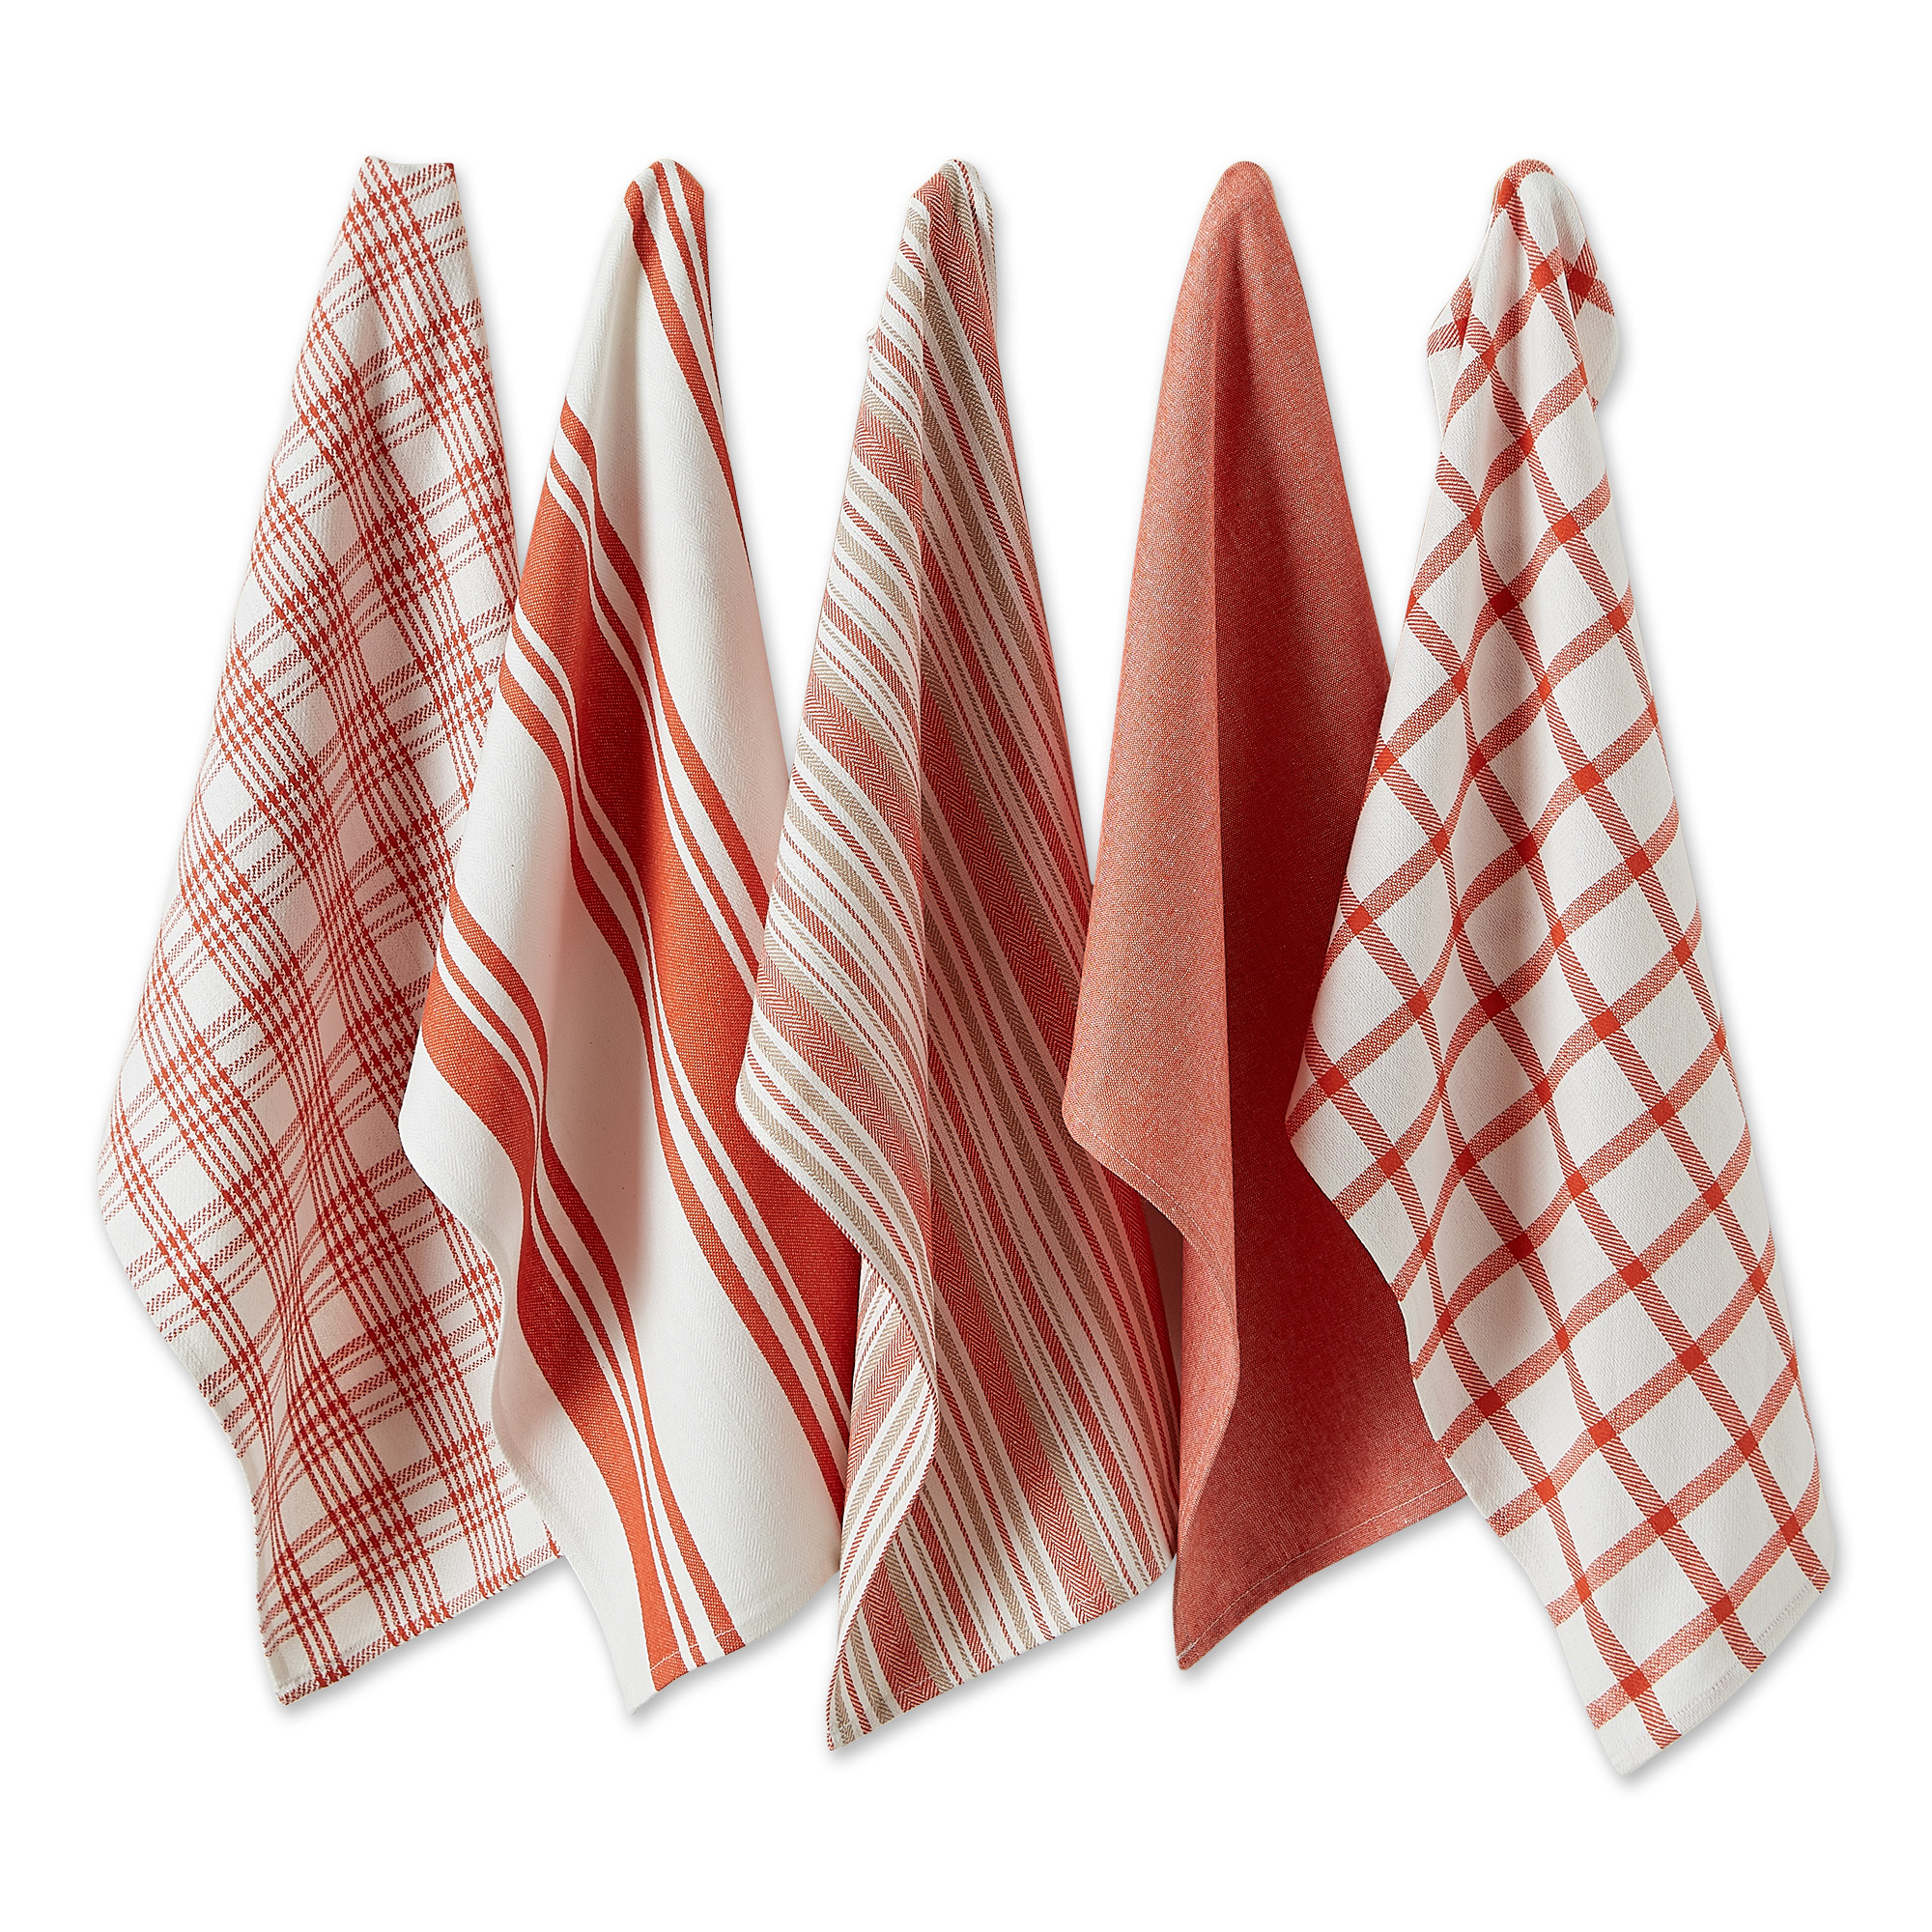 Contemporary Home Living Set of 5 Assorted Red and White Spice Woven Dish Towel, 28"